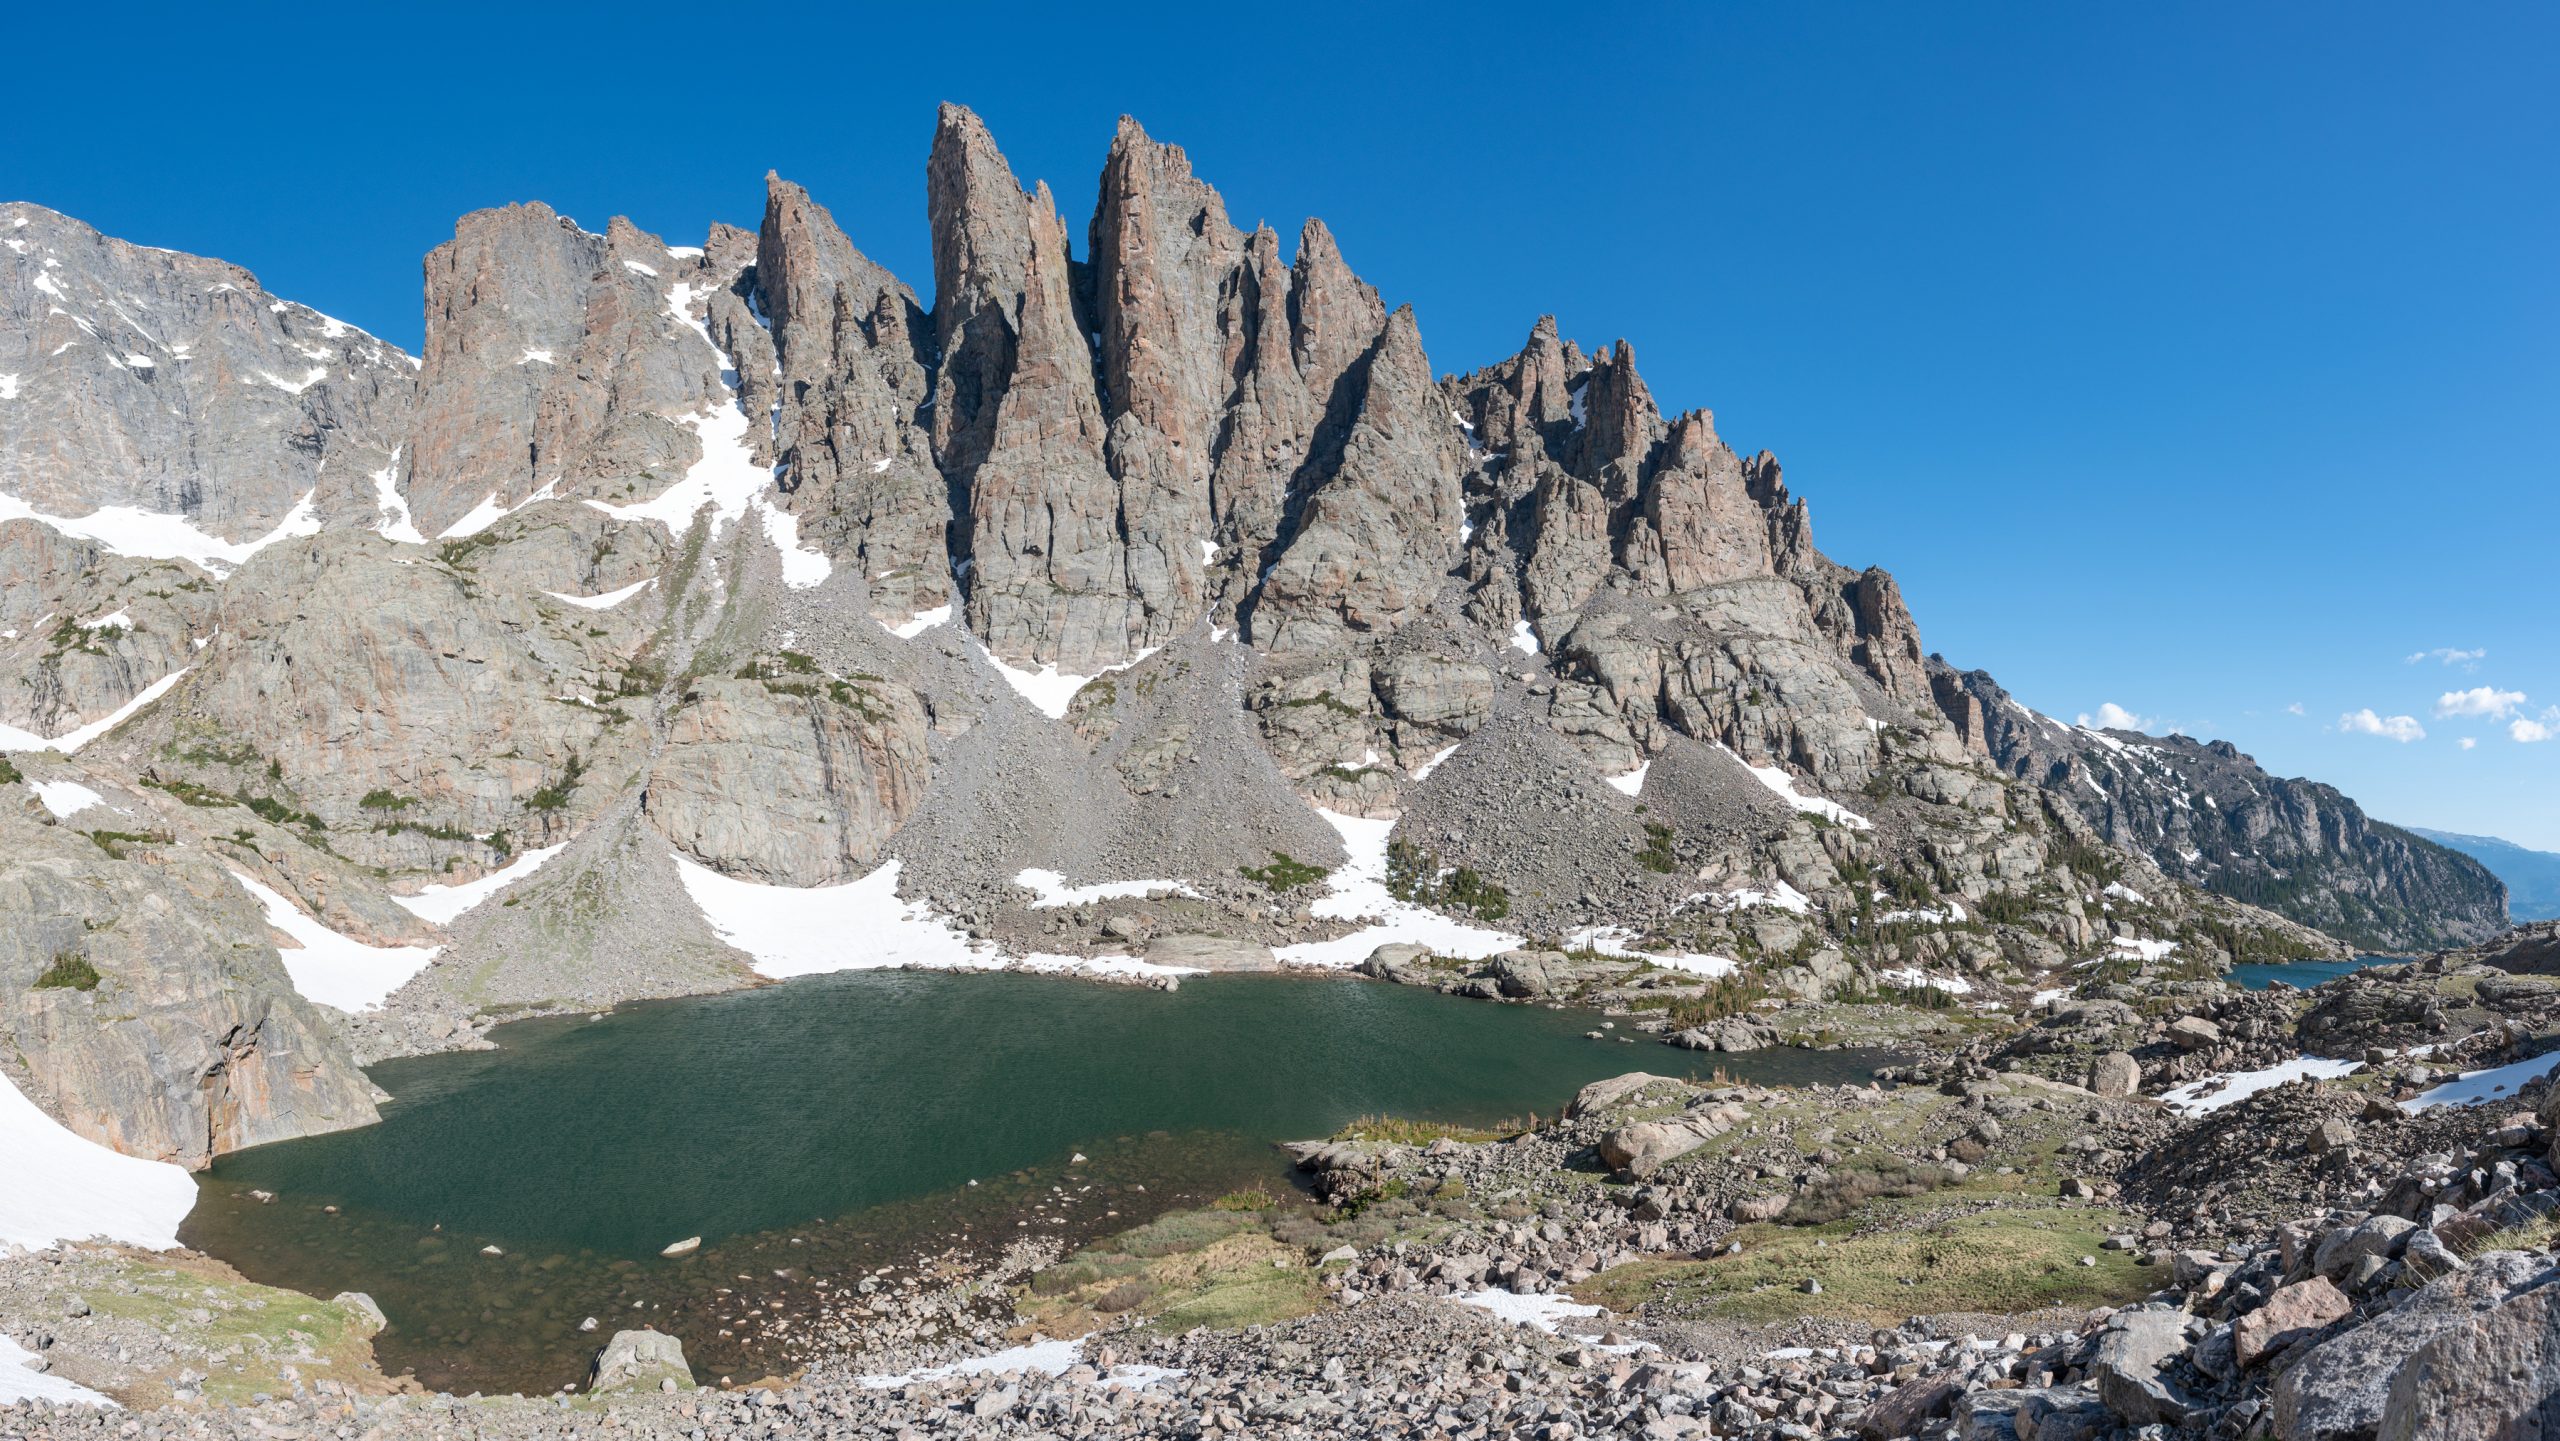 Panorama of Sky Pond, Lake of Glass and the Sharktooth, mountains and alpine lakes